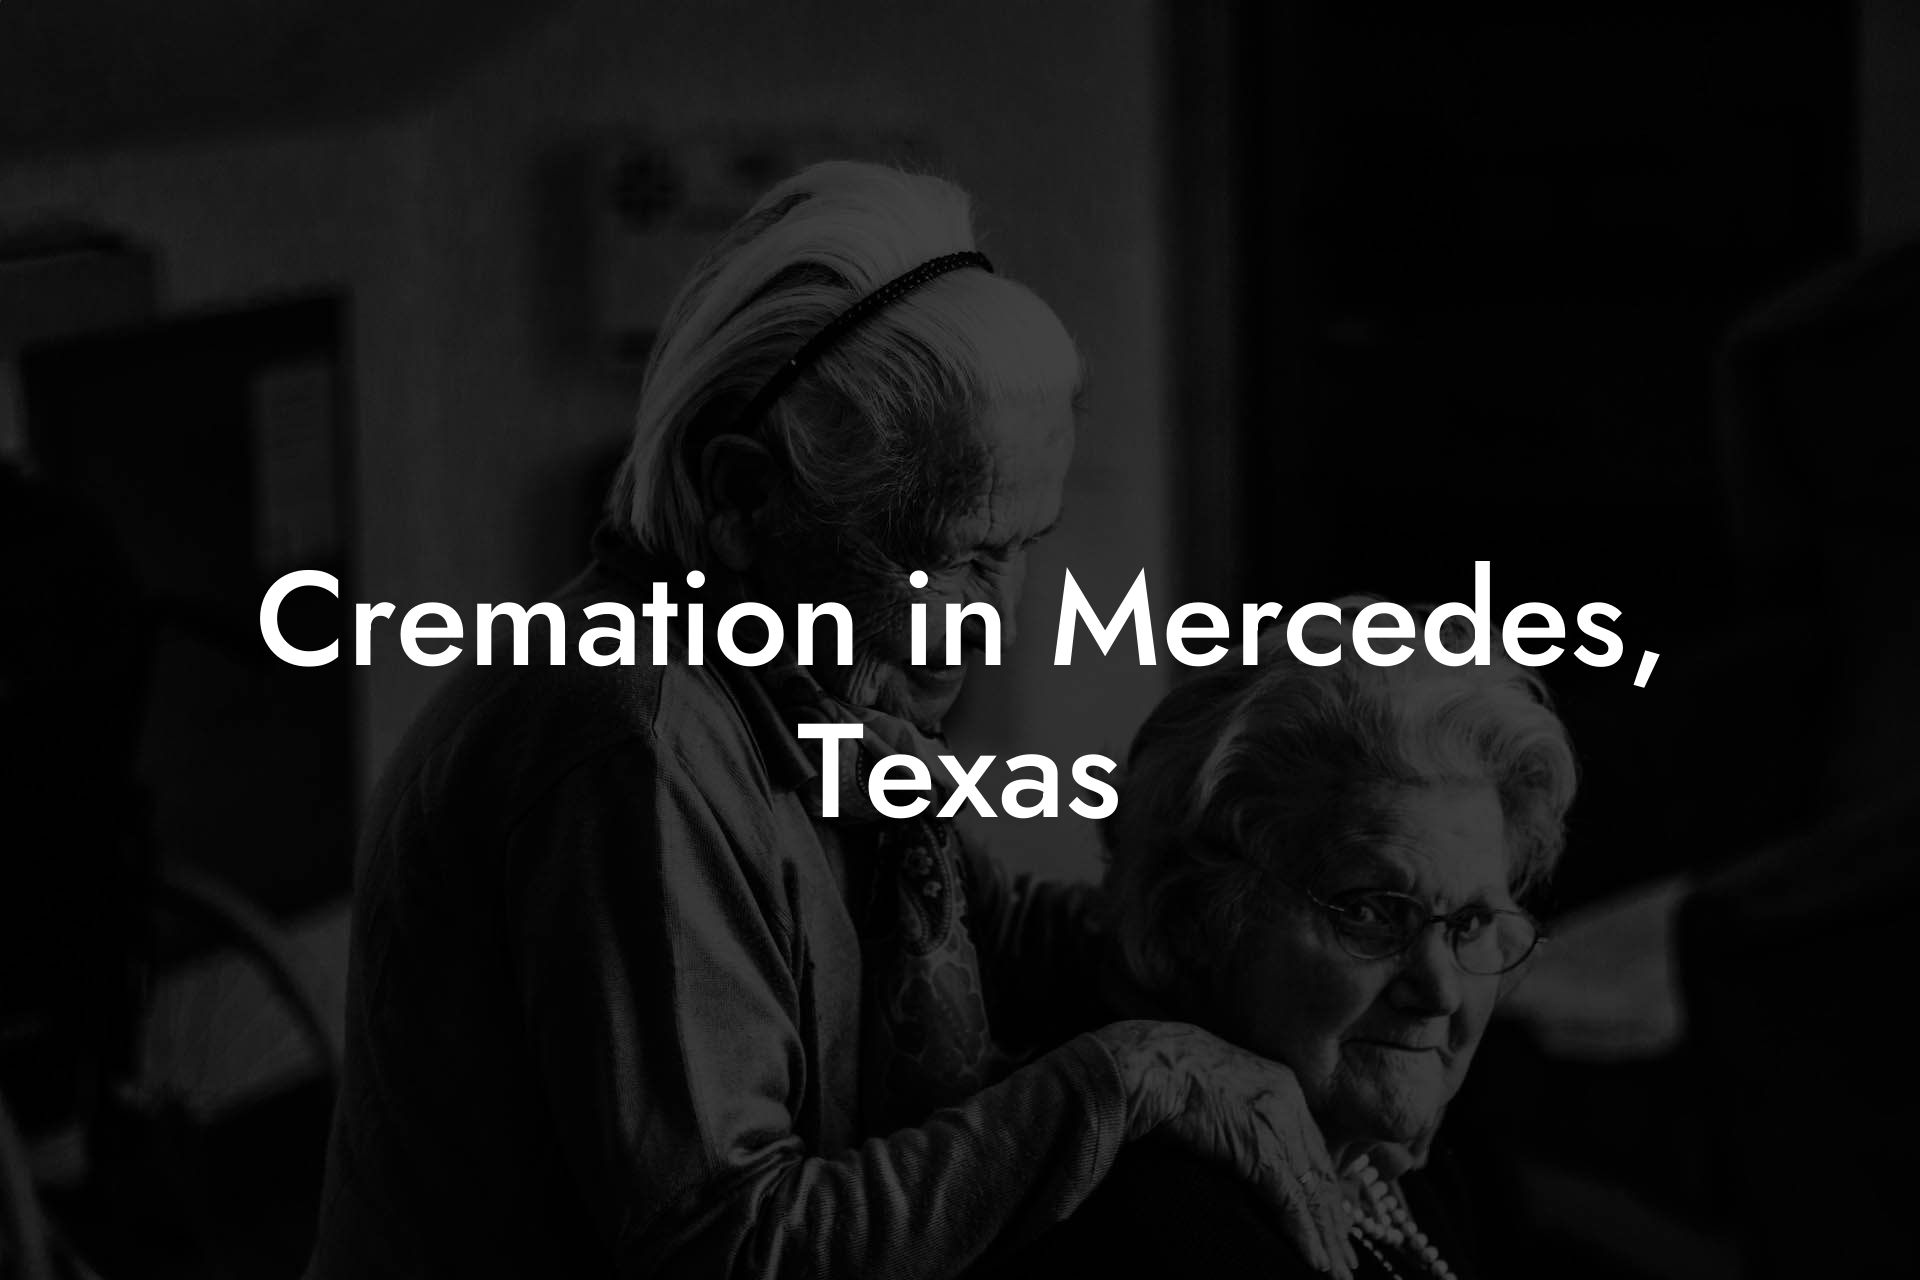 Cremation in Mercedes, Texas